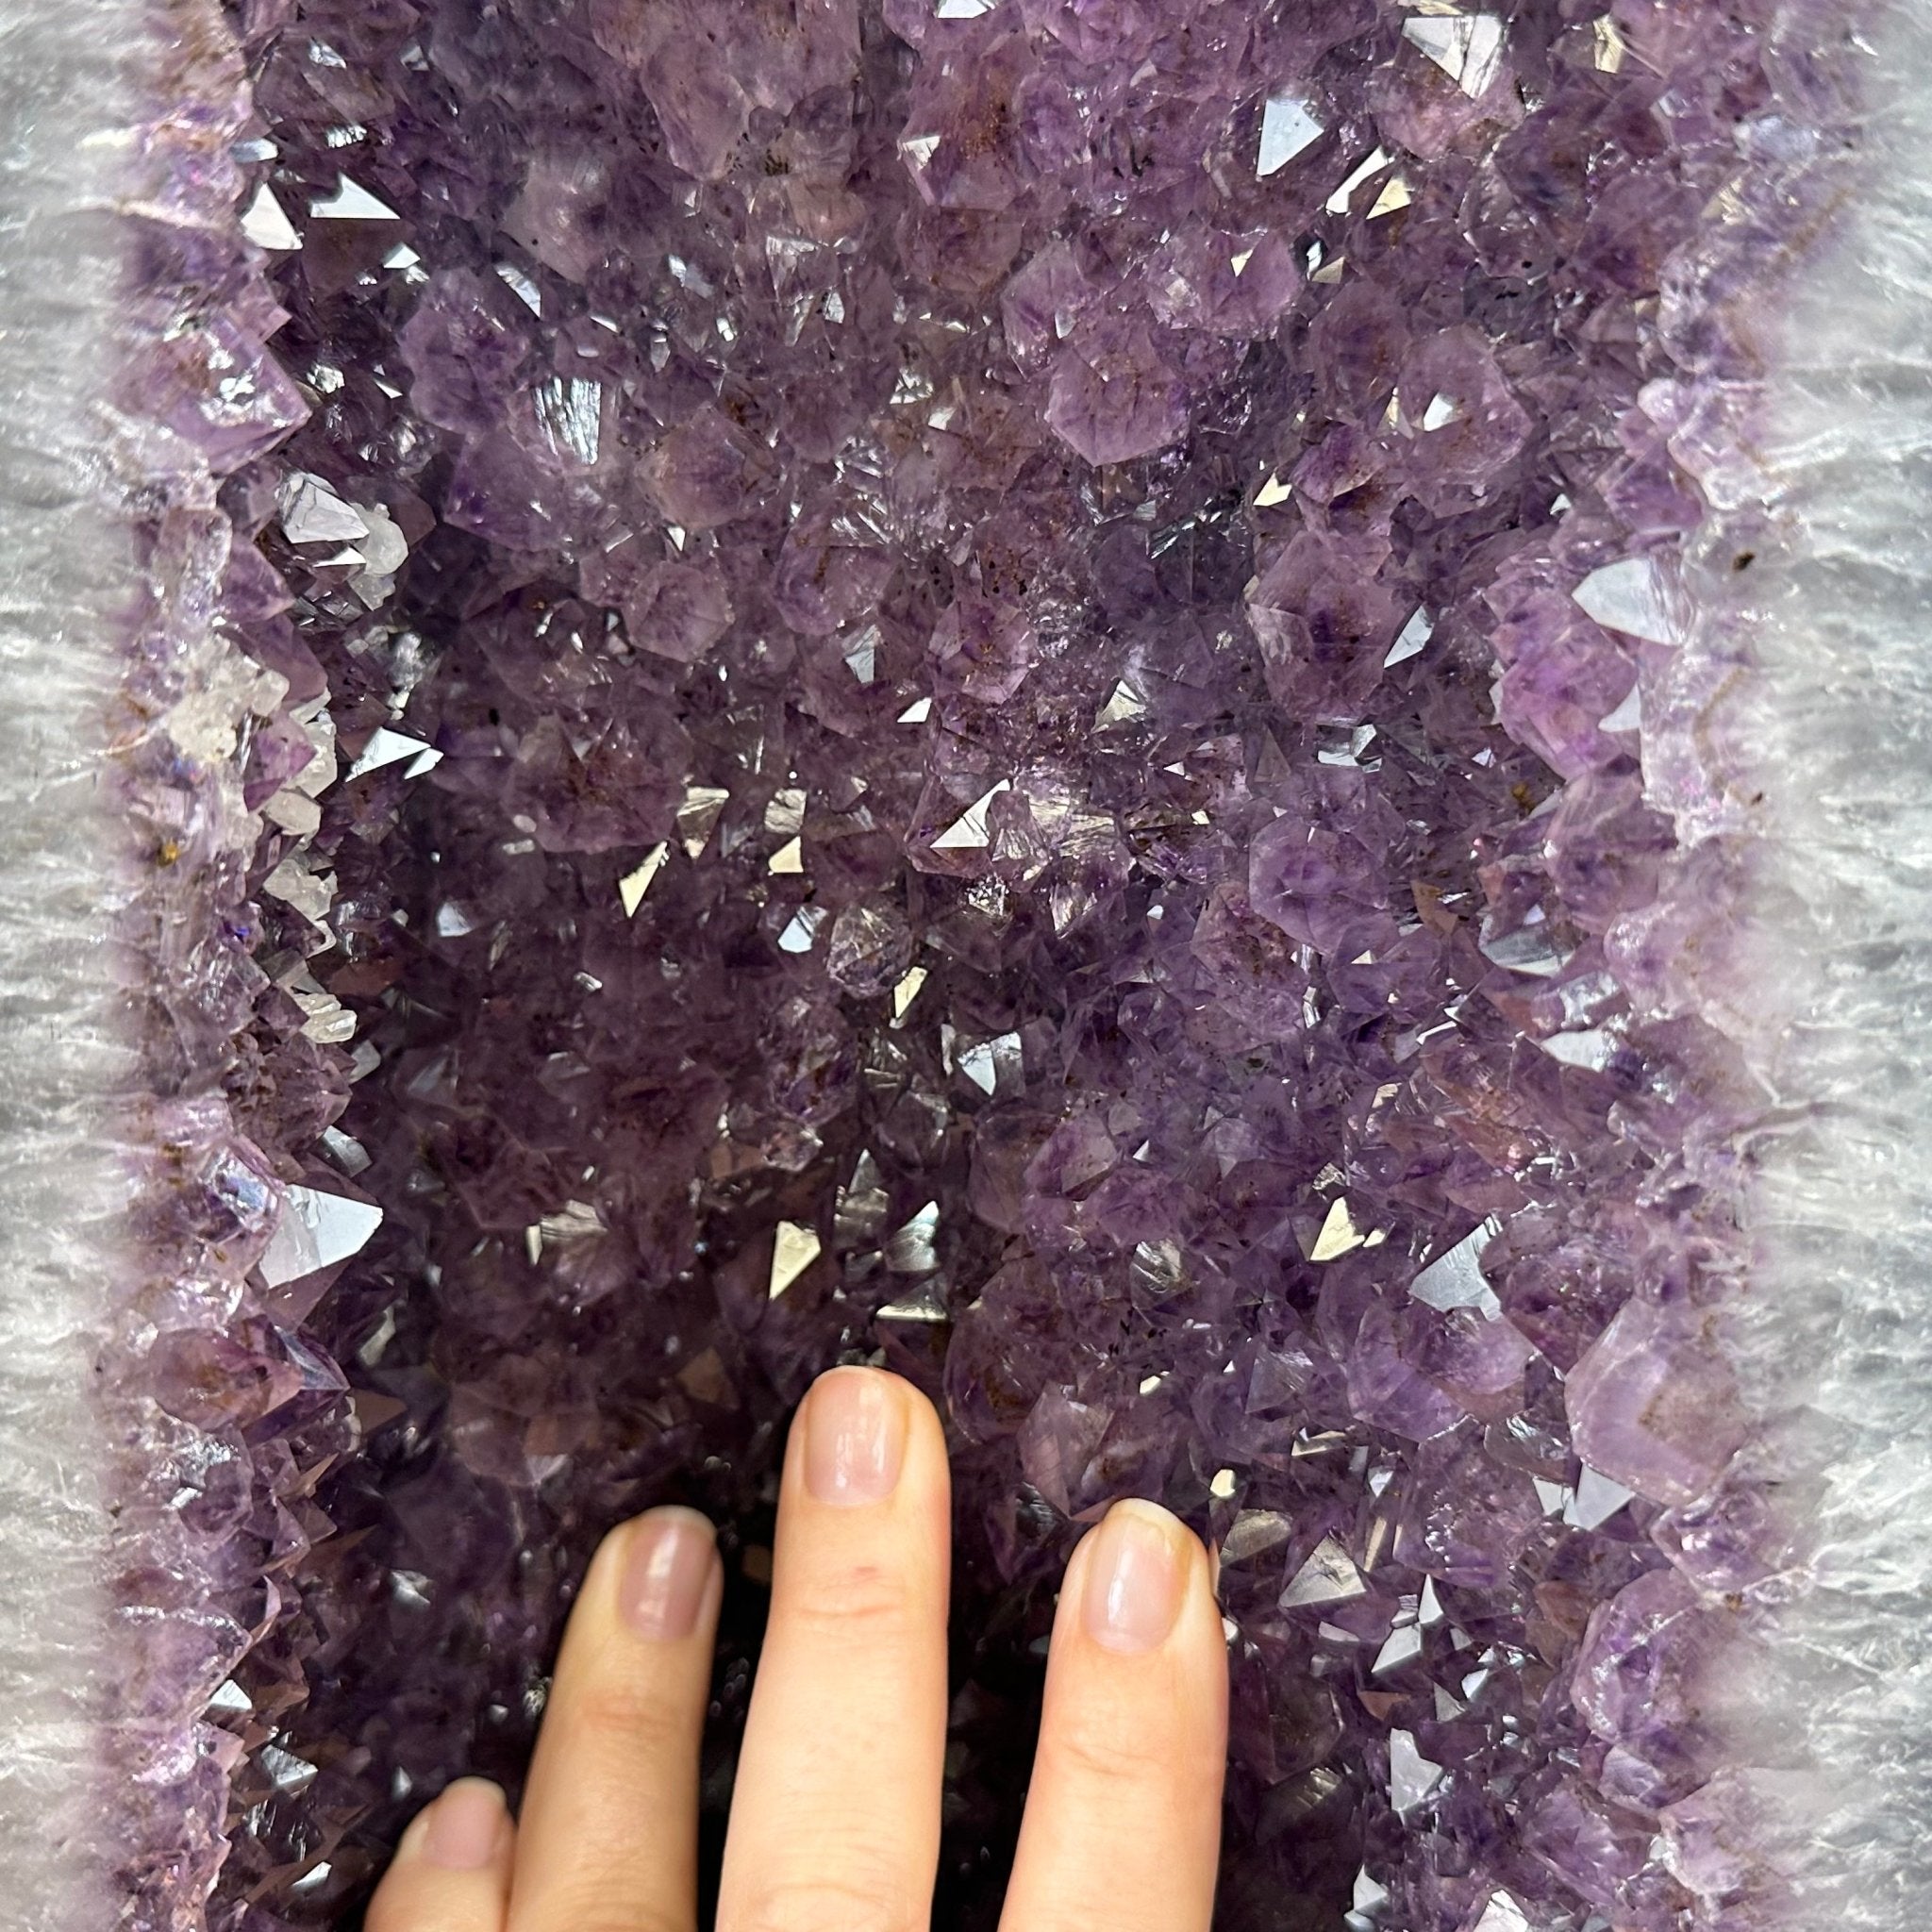 Extra Quality Brazilian Amethyst Cathedral, 125.6 lbs & 41" Tall, Model #5601-1238 by Brazil Gems - Brazil GemsBrazil GemsExtra Quality Brazilian Amethyst Cathedral, 125.6 lbs & 41" Tall, Model #5601-1238 by Brazil GemsCathedrals5601-1238